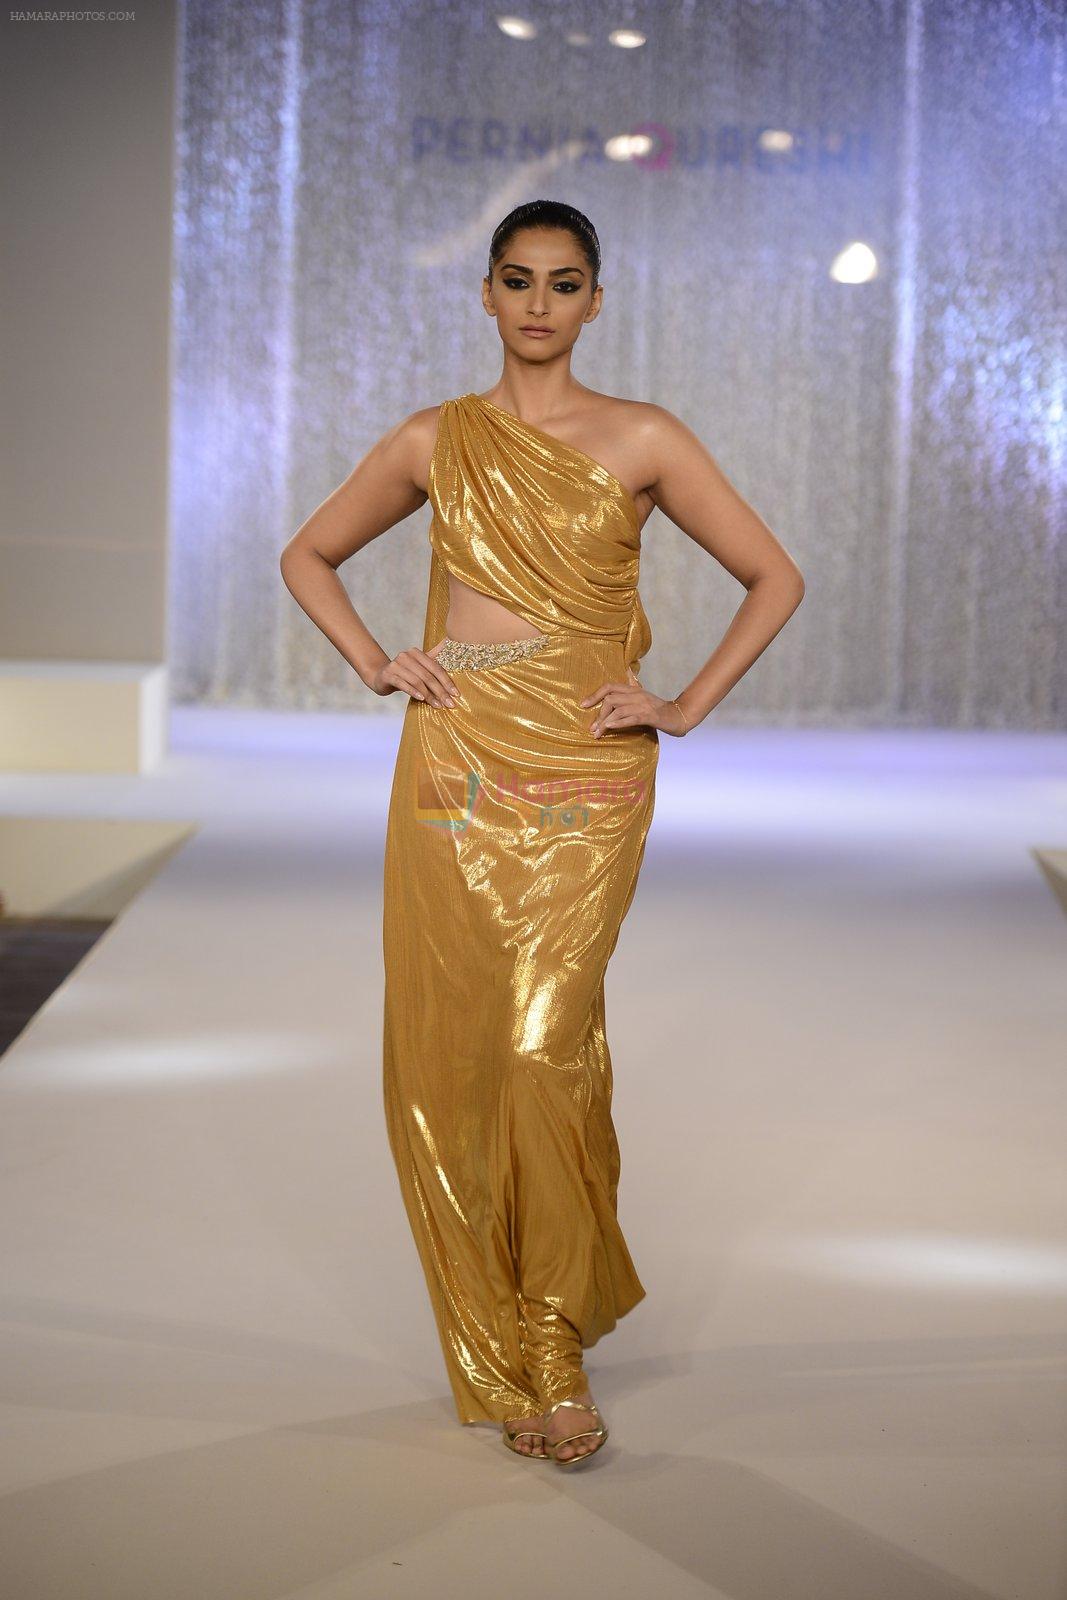 Sonam Kapoor walks the ramp for Pernia Qureshi's standalone show on 9th June 2016